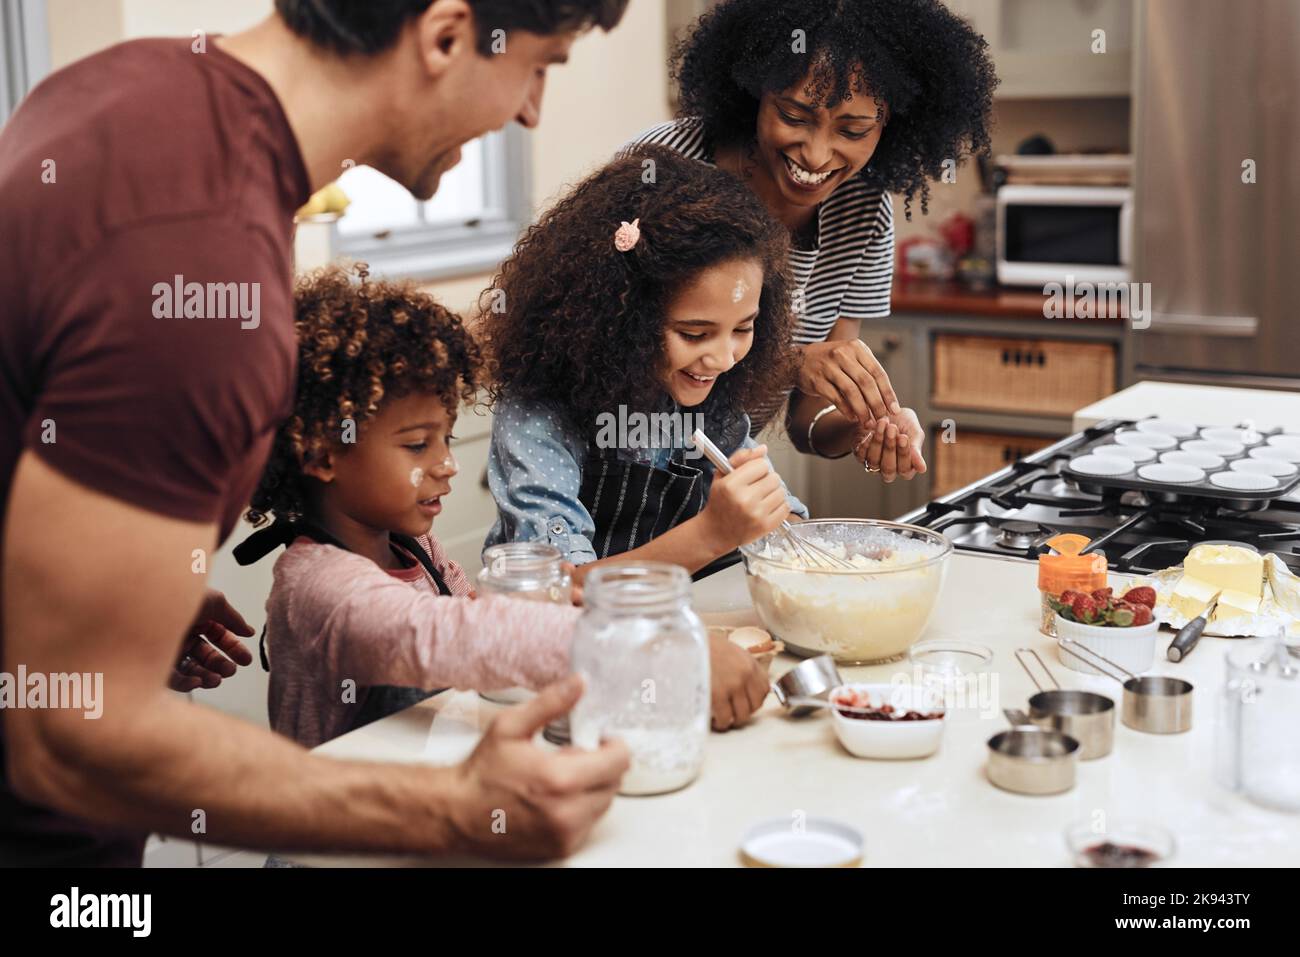 Were having so much fun with baking. a young couple baking at home with their two children. Stock Photo